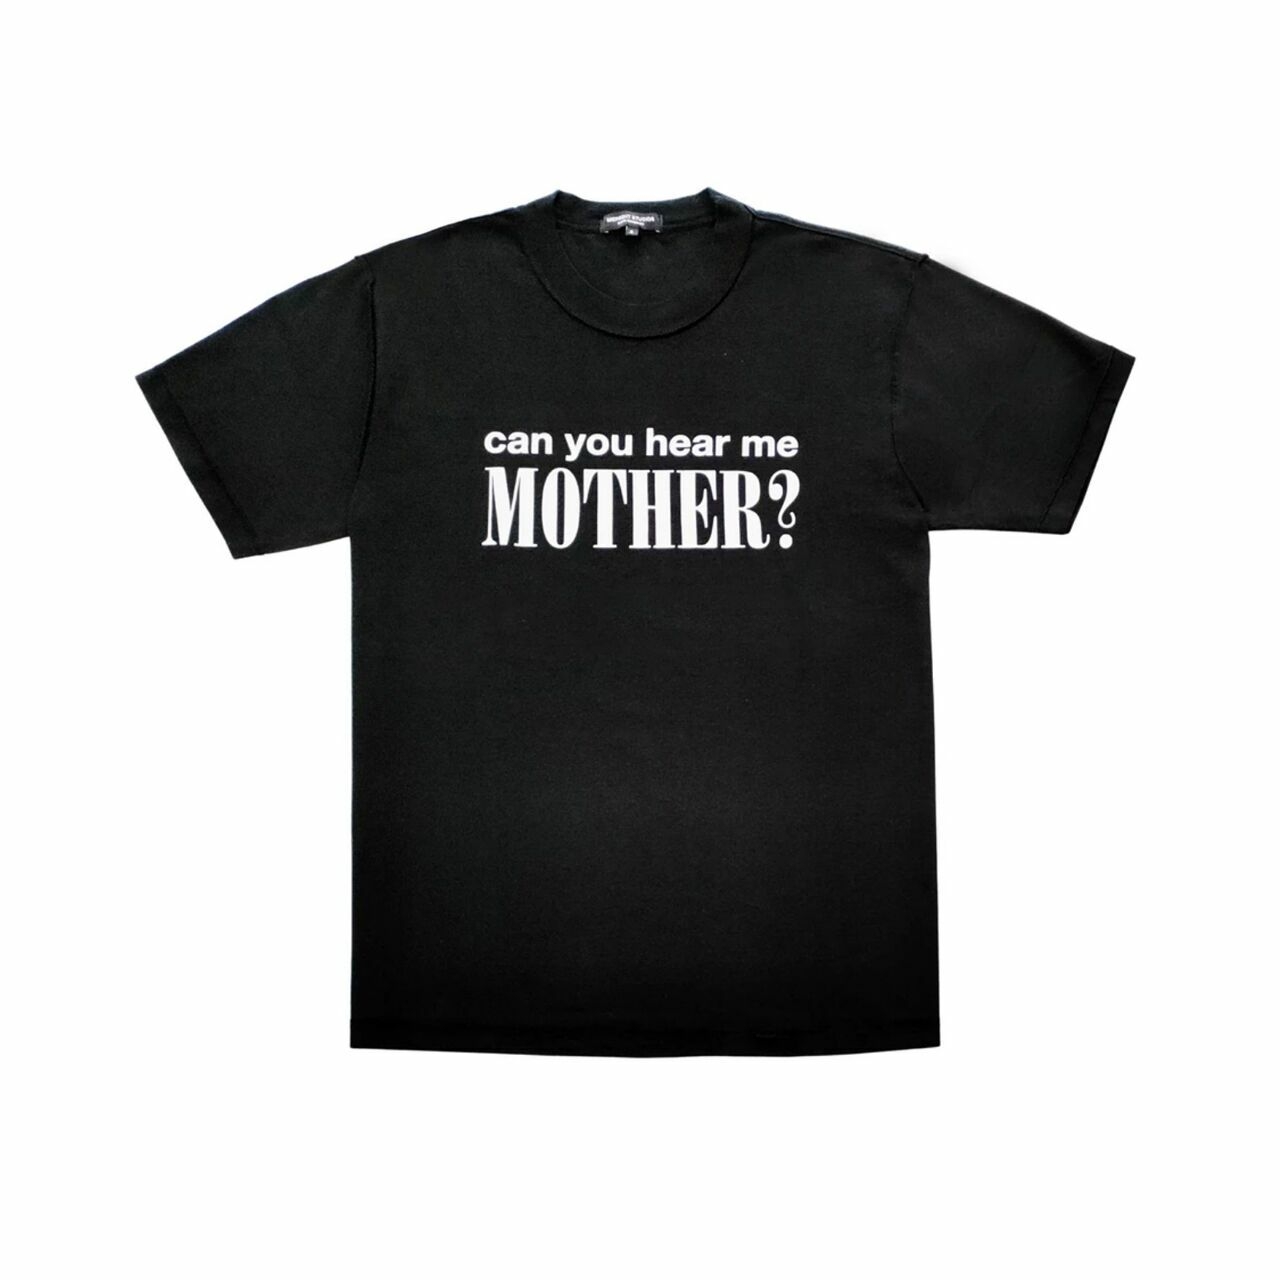 Midnight Studios x Shane Gonzales Can you hear me mother? T-Shirt